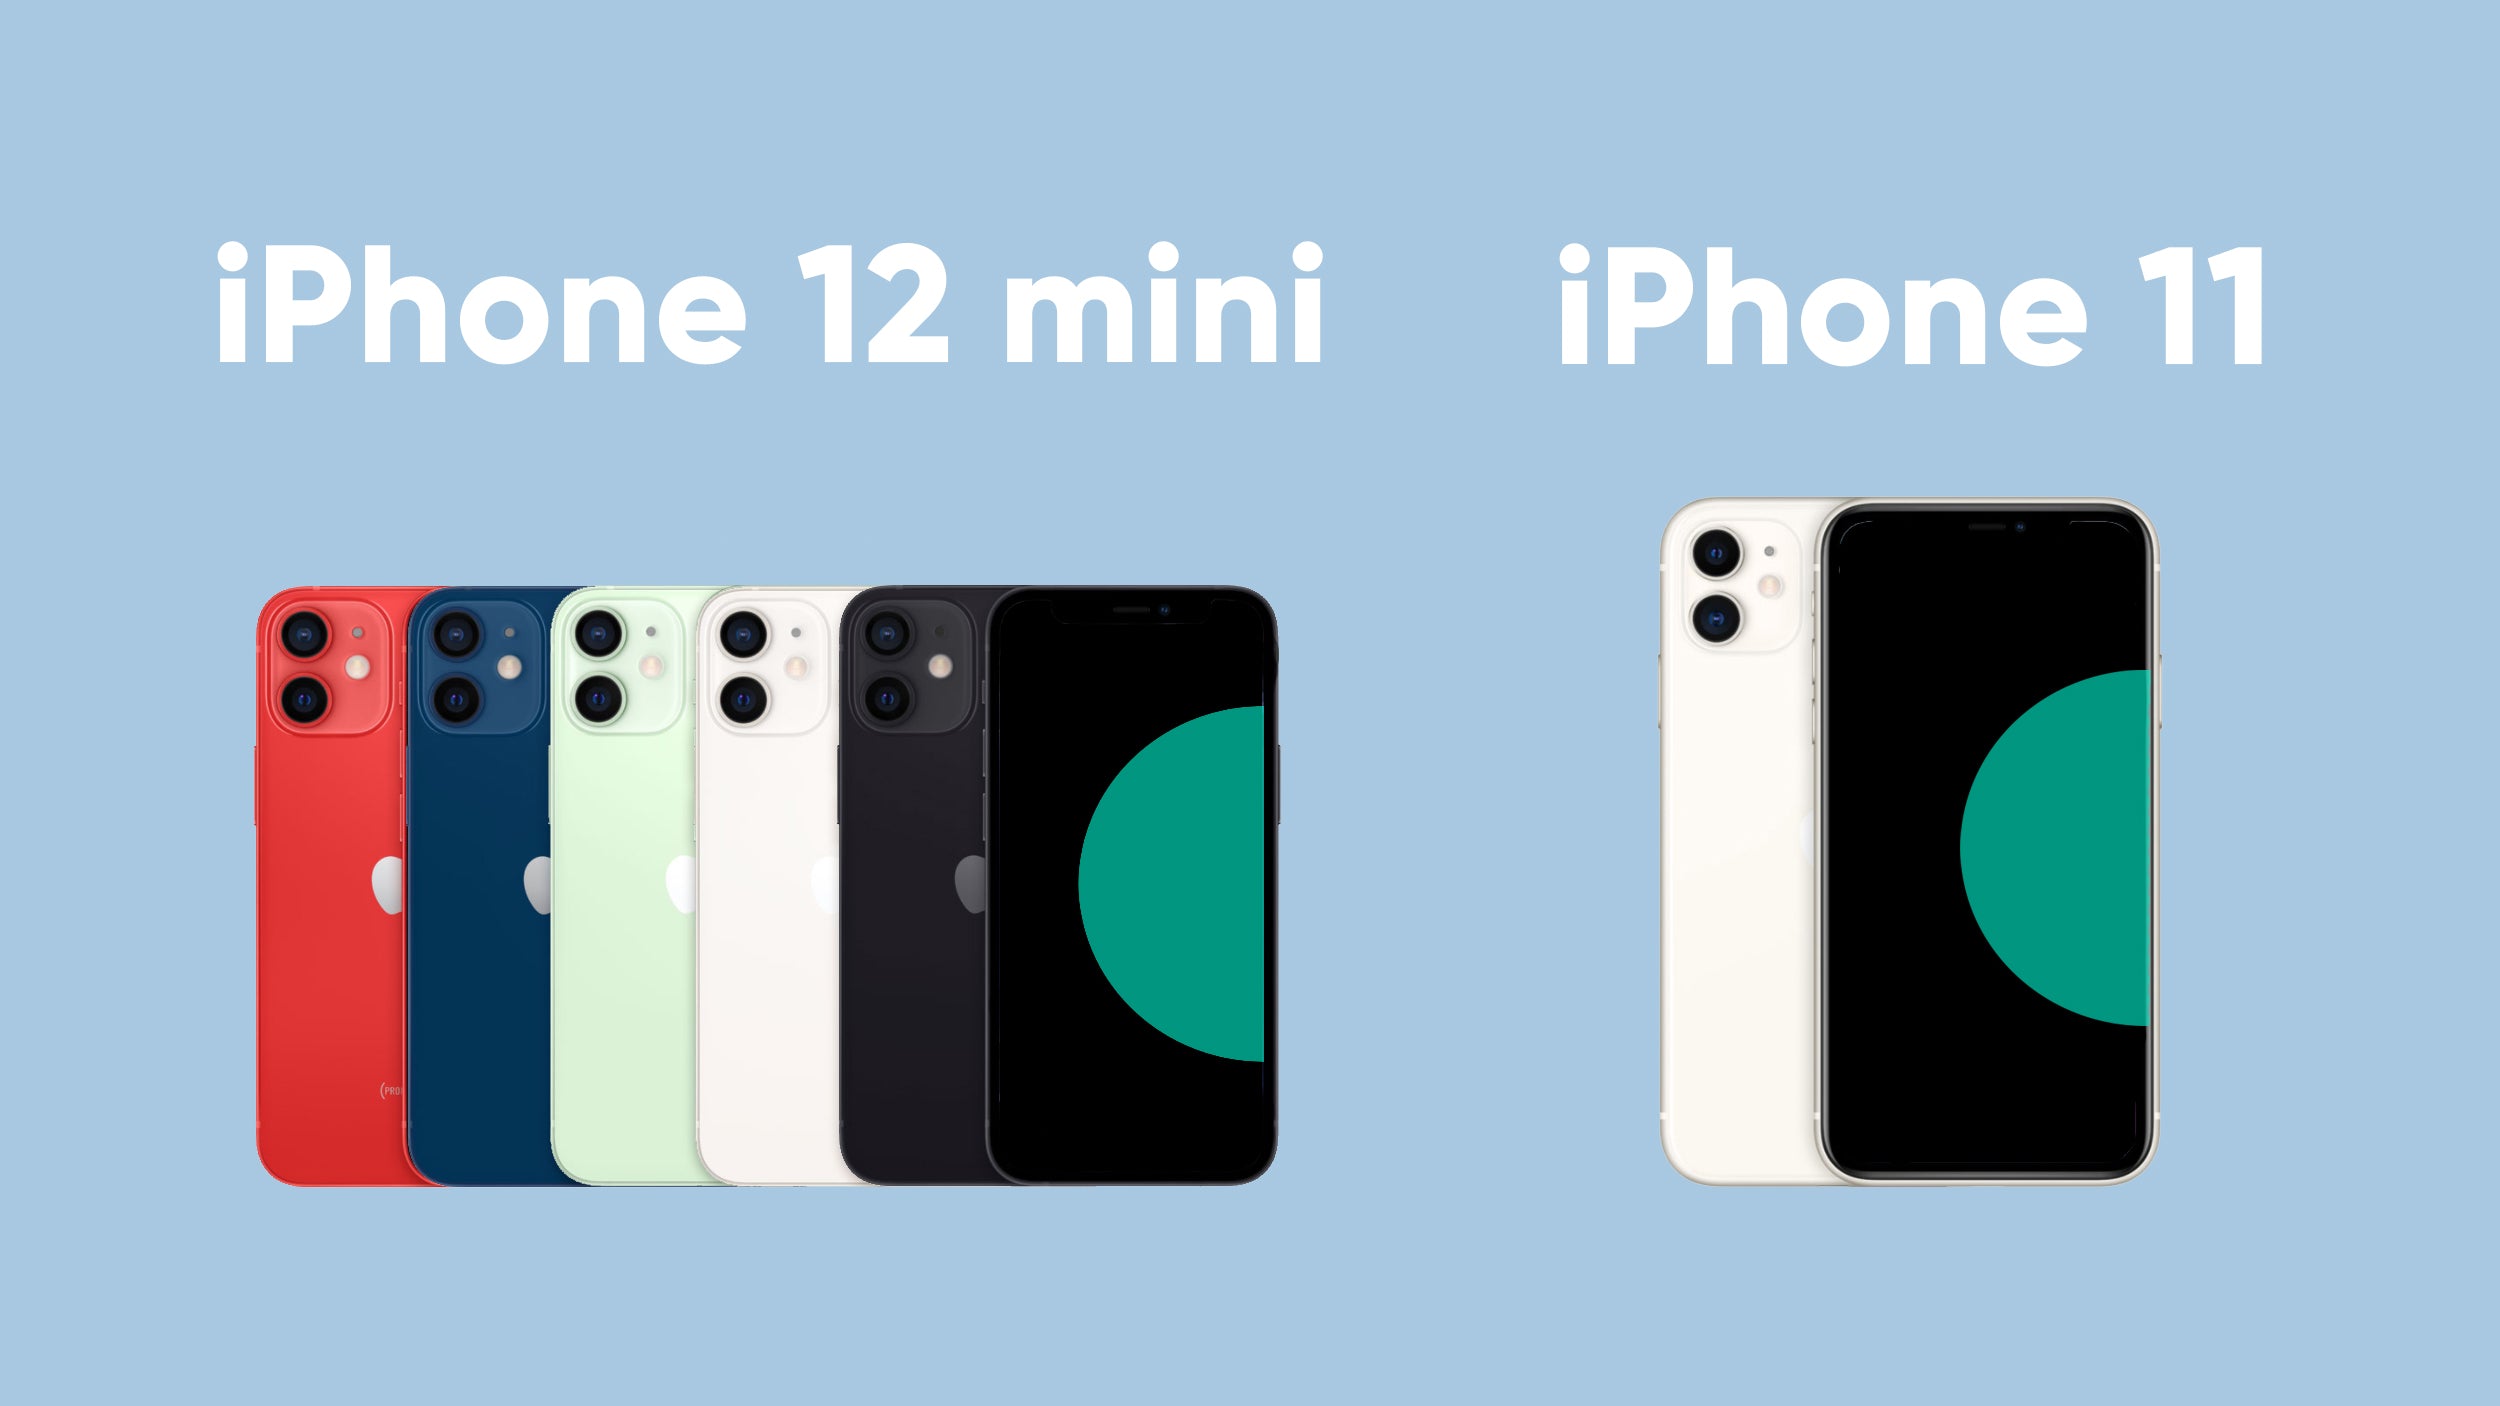 Is The iPhone 11 or iPhone 12 mini Better? – Frank Mobile